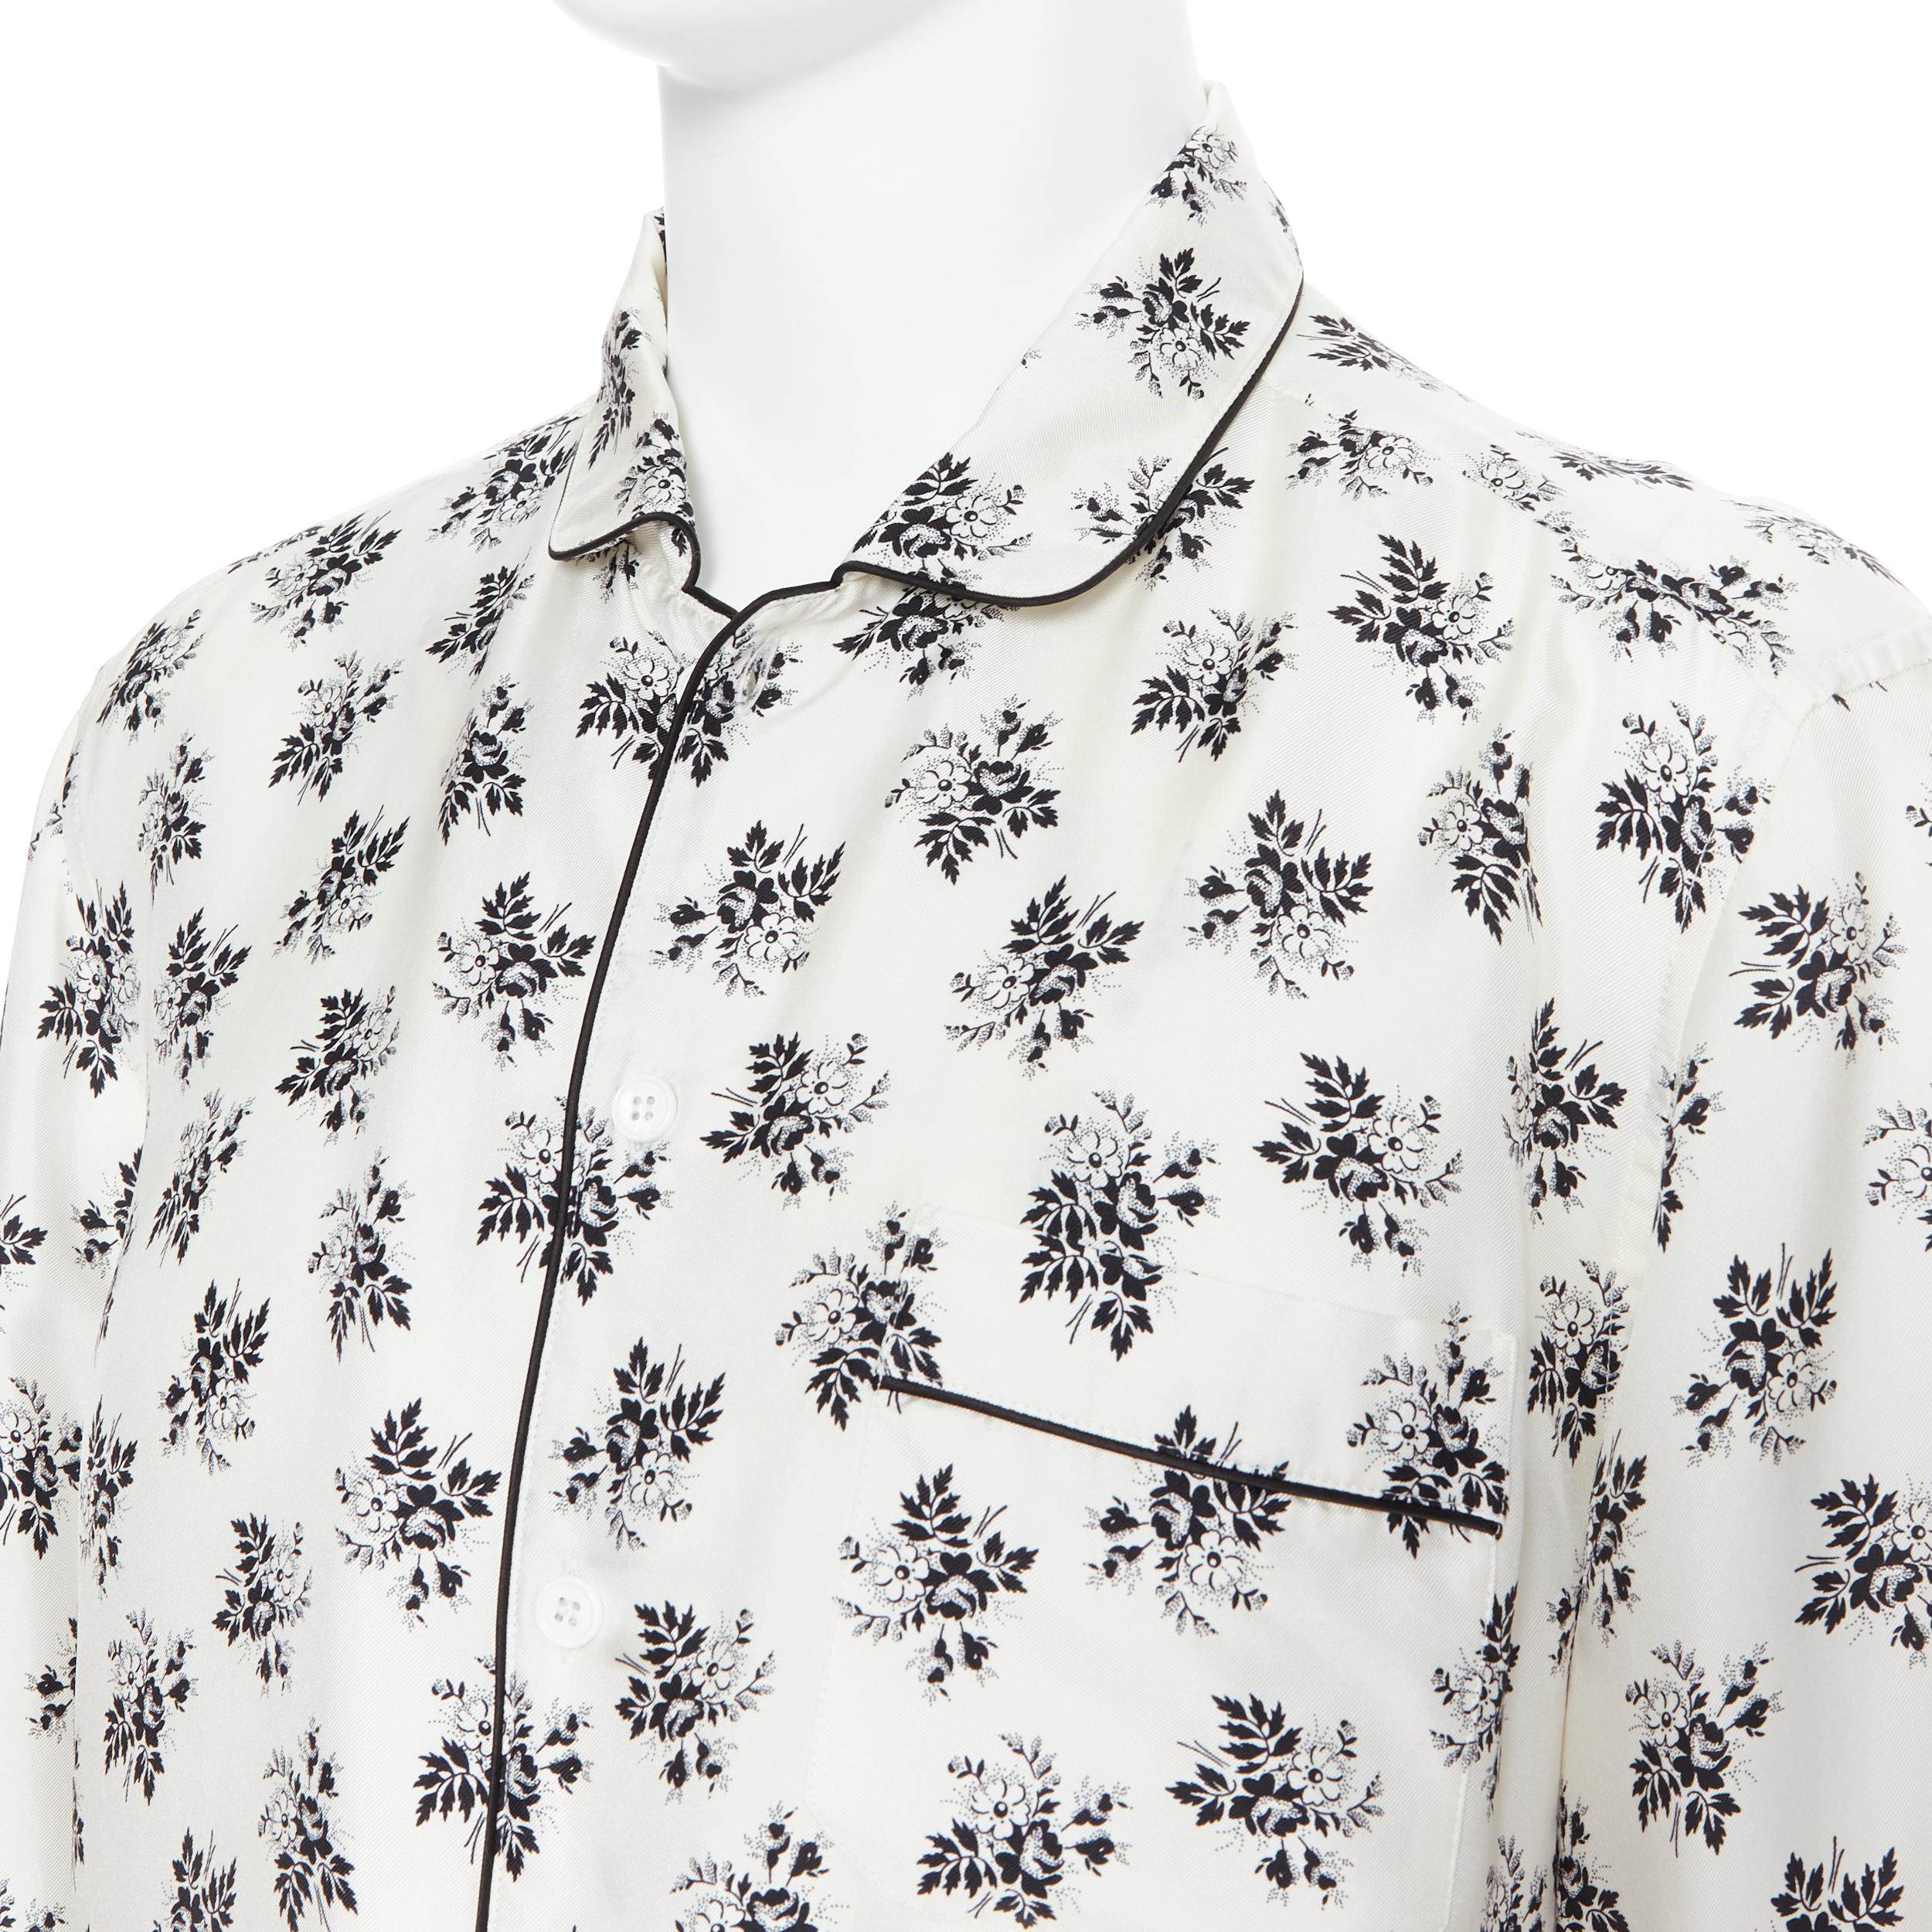 DOLCE GABBANA 100% silk white floral silk print pajama collar casual shirt IT4 M
Brand: Dolce Gabanna
Model Name / Style: Silk shirt
Material: Silk
Color: White
Pattern: Floral
Closure: Button
Extra Detail: Pyjama style silk shirt.
Made in: